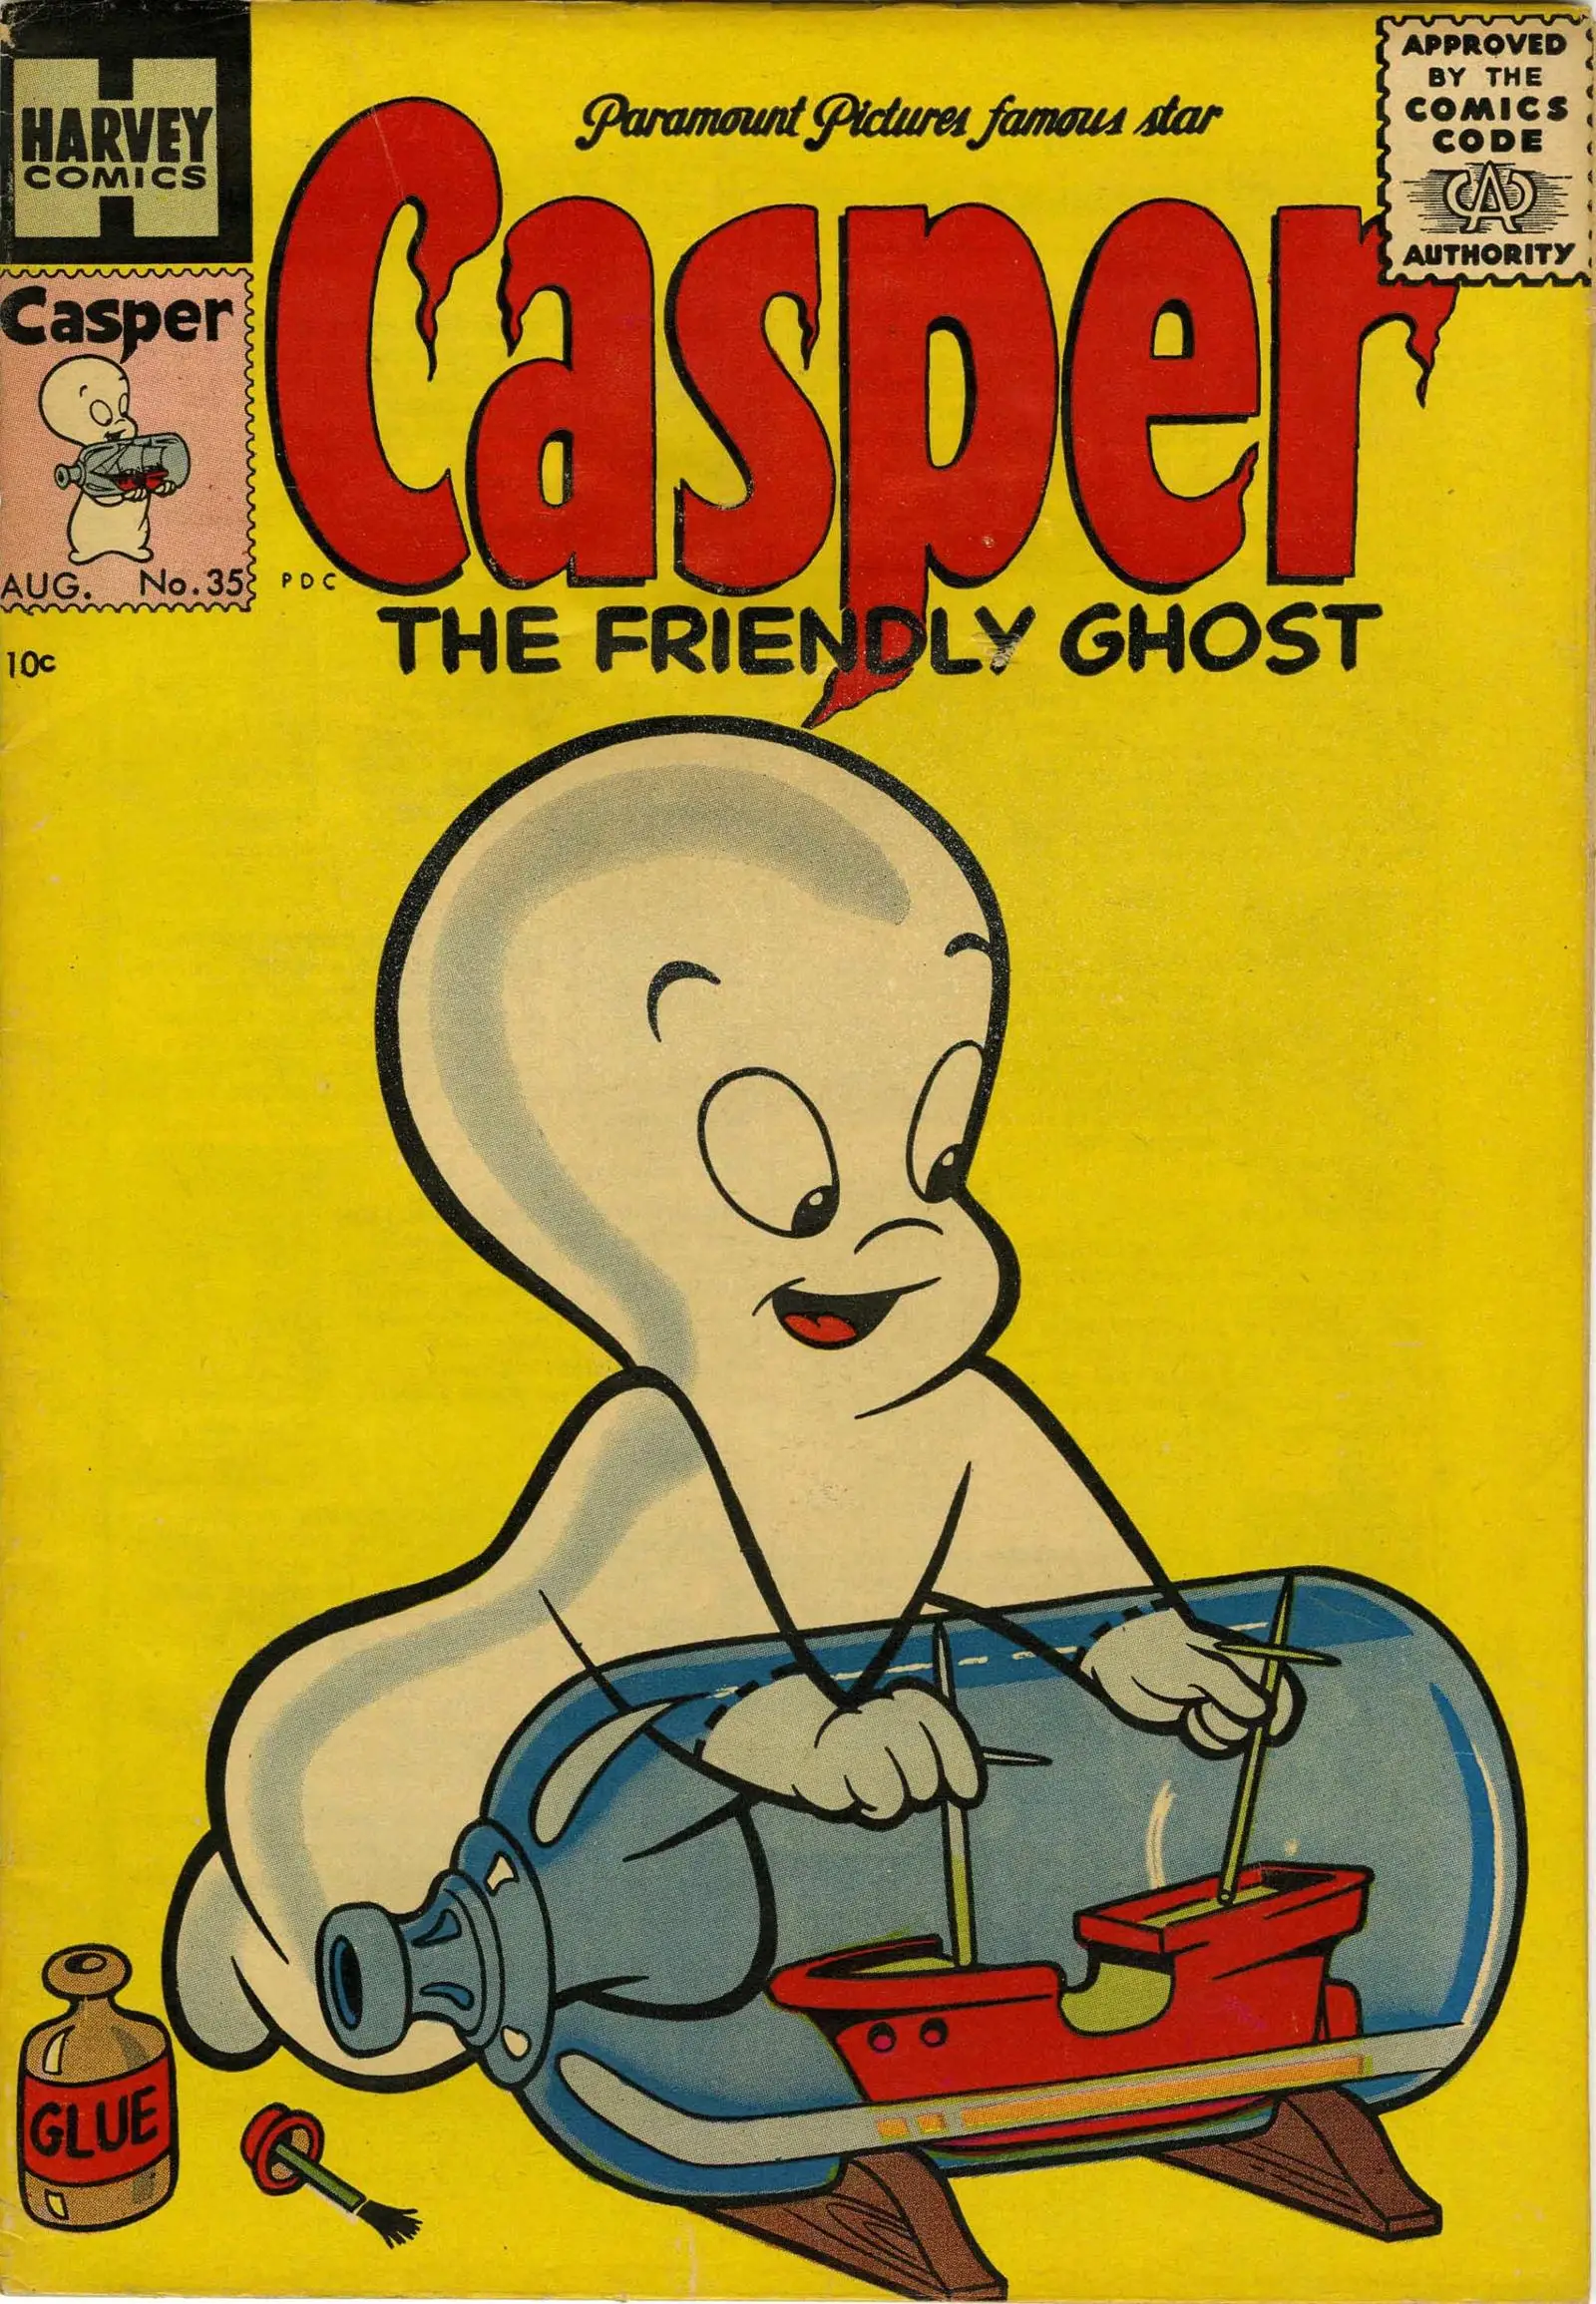 Casper the friendly ghost decorations